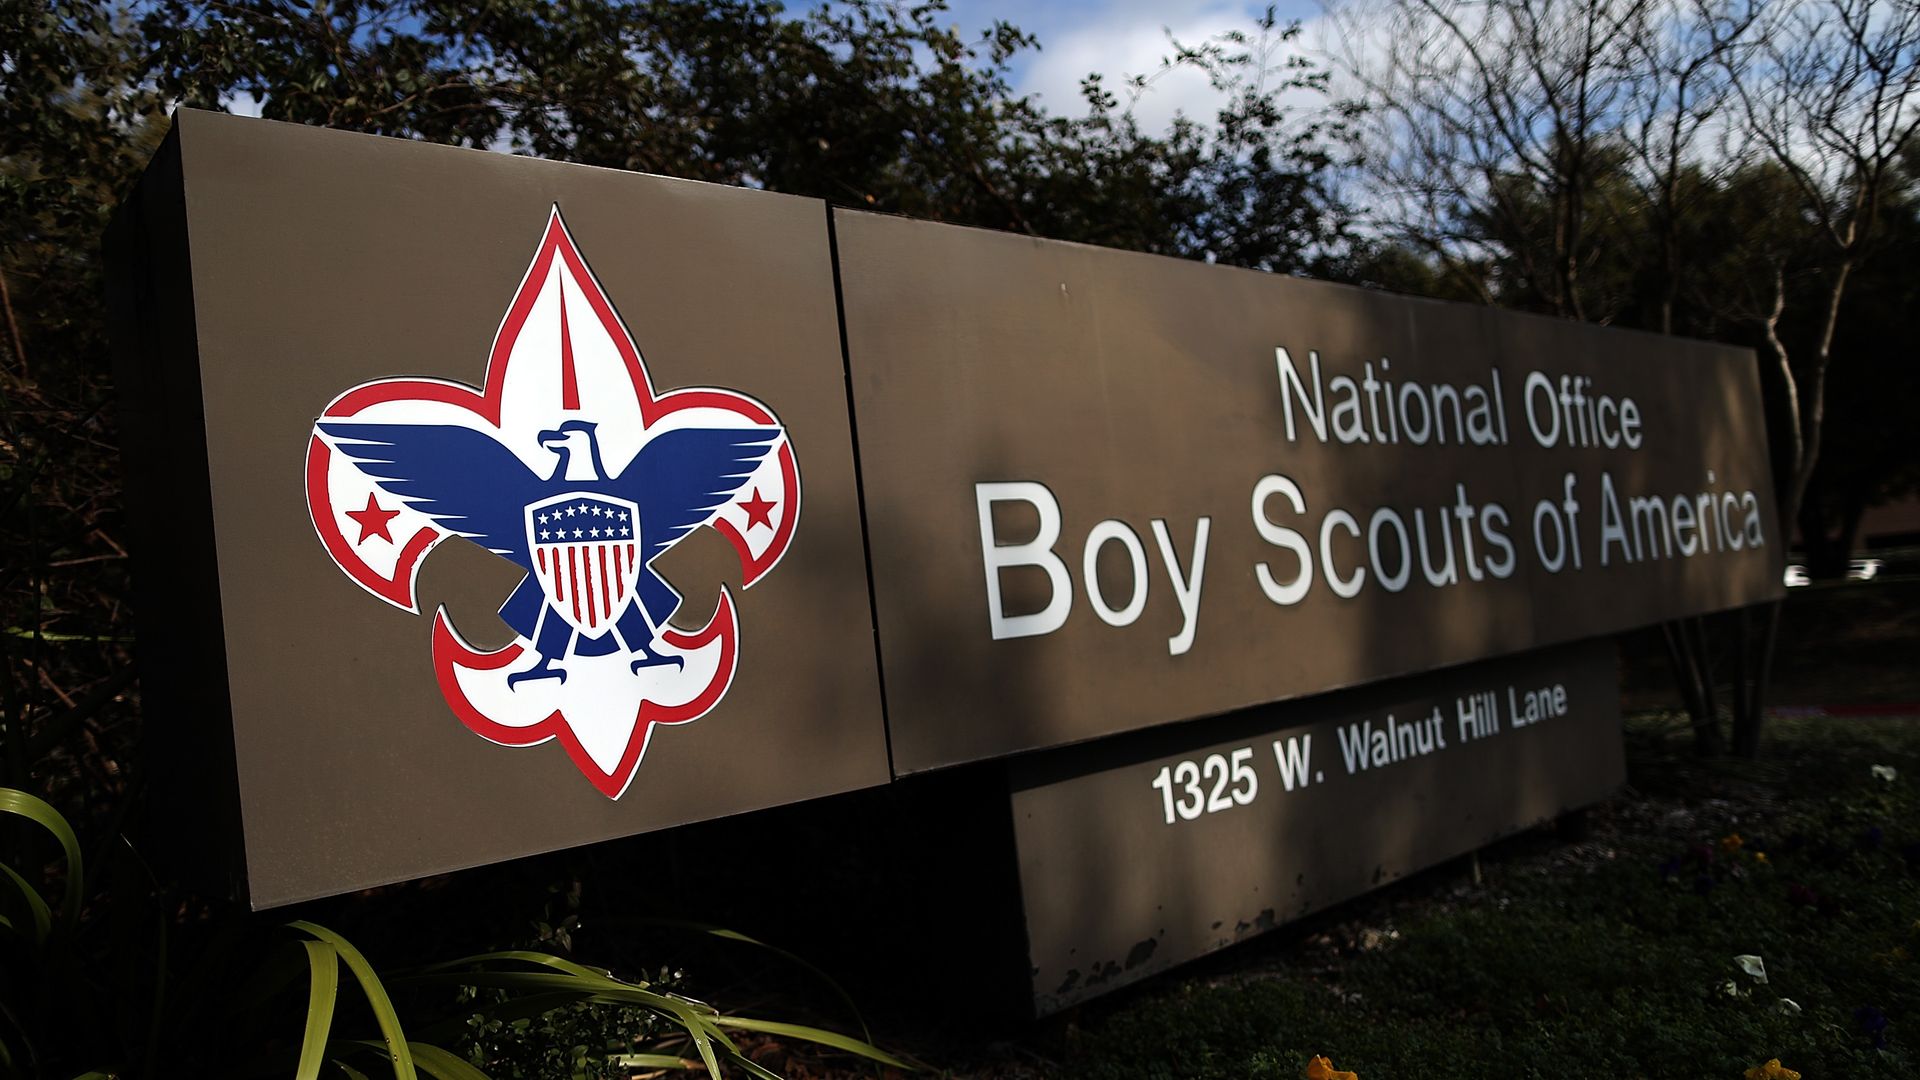 A photo of the Boy Scouts of America sign